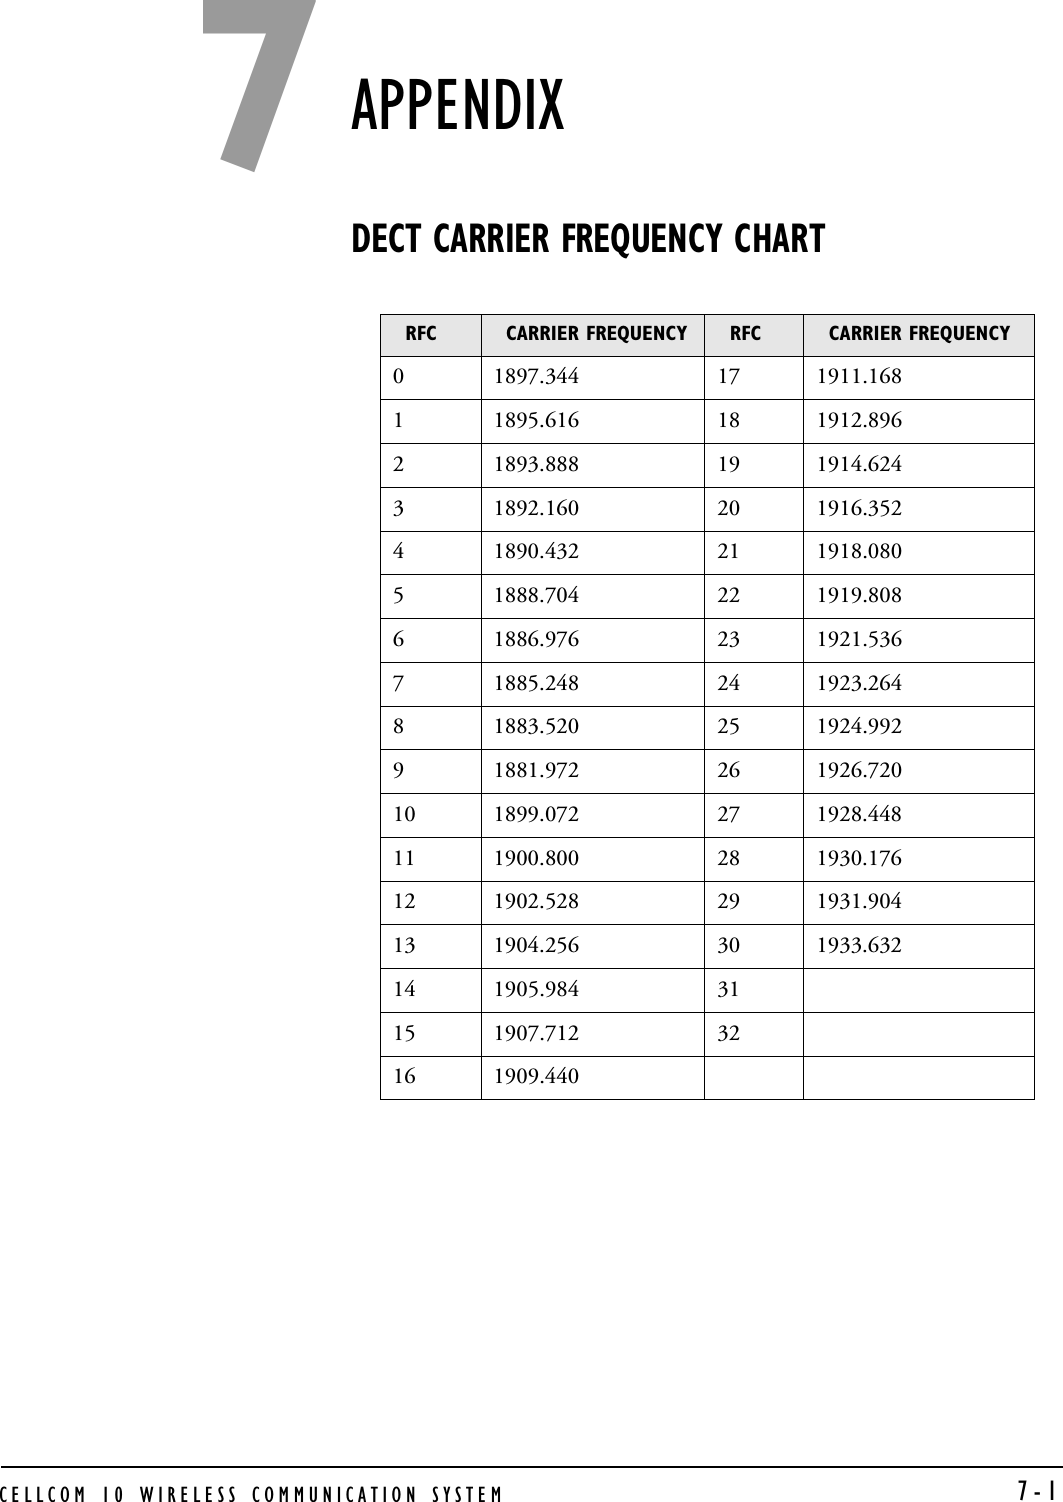 CELLCOM 10 WIRELESS COMMUNICATION SYSTEM  7-1APPENDIXDECT CARRIER FREQUENCY CHART RFC CARRIER FREQUENCY RFC CARRIER FREQUENCY0 1897.344 17 1911.1681 1895.616 18 1912.8962 1893.888 19 1914.6243 1892.160 20 1916.3524 1890.432 21 1918.0805 1888.704 22 1919.8086 1886.976 23 1921.5367 1885.248 24 1923.2648 1883.520 25 1924.9929 1881.972 26 1926.72010 1899.072 27 1928.44811 1900.800 28 1930.17612 1902.528 29 1931.90413 1904.256 30 1933.63214 1905.984 3115 1907.712 3216 1909.4407